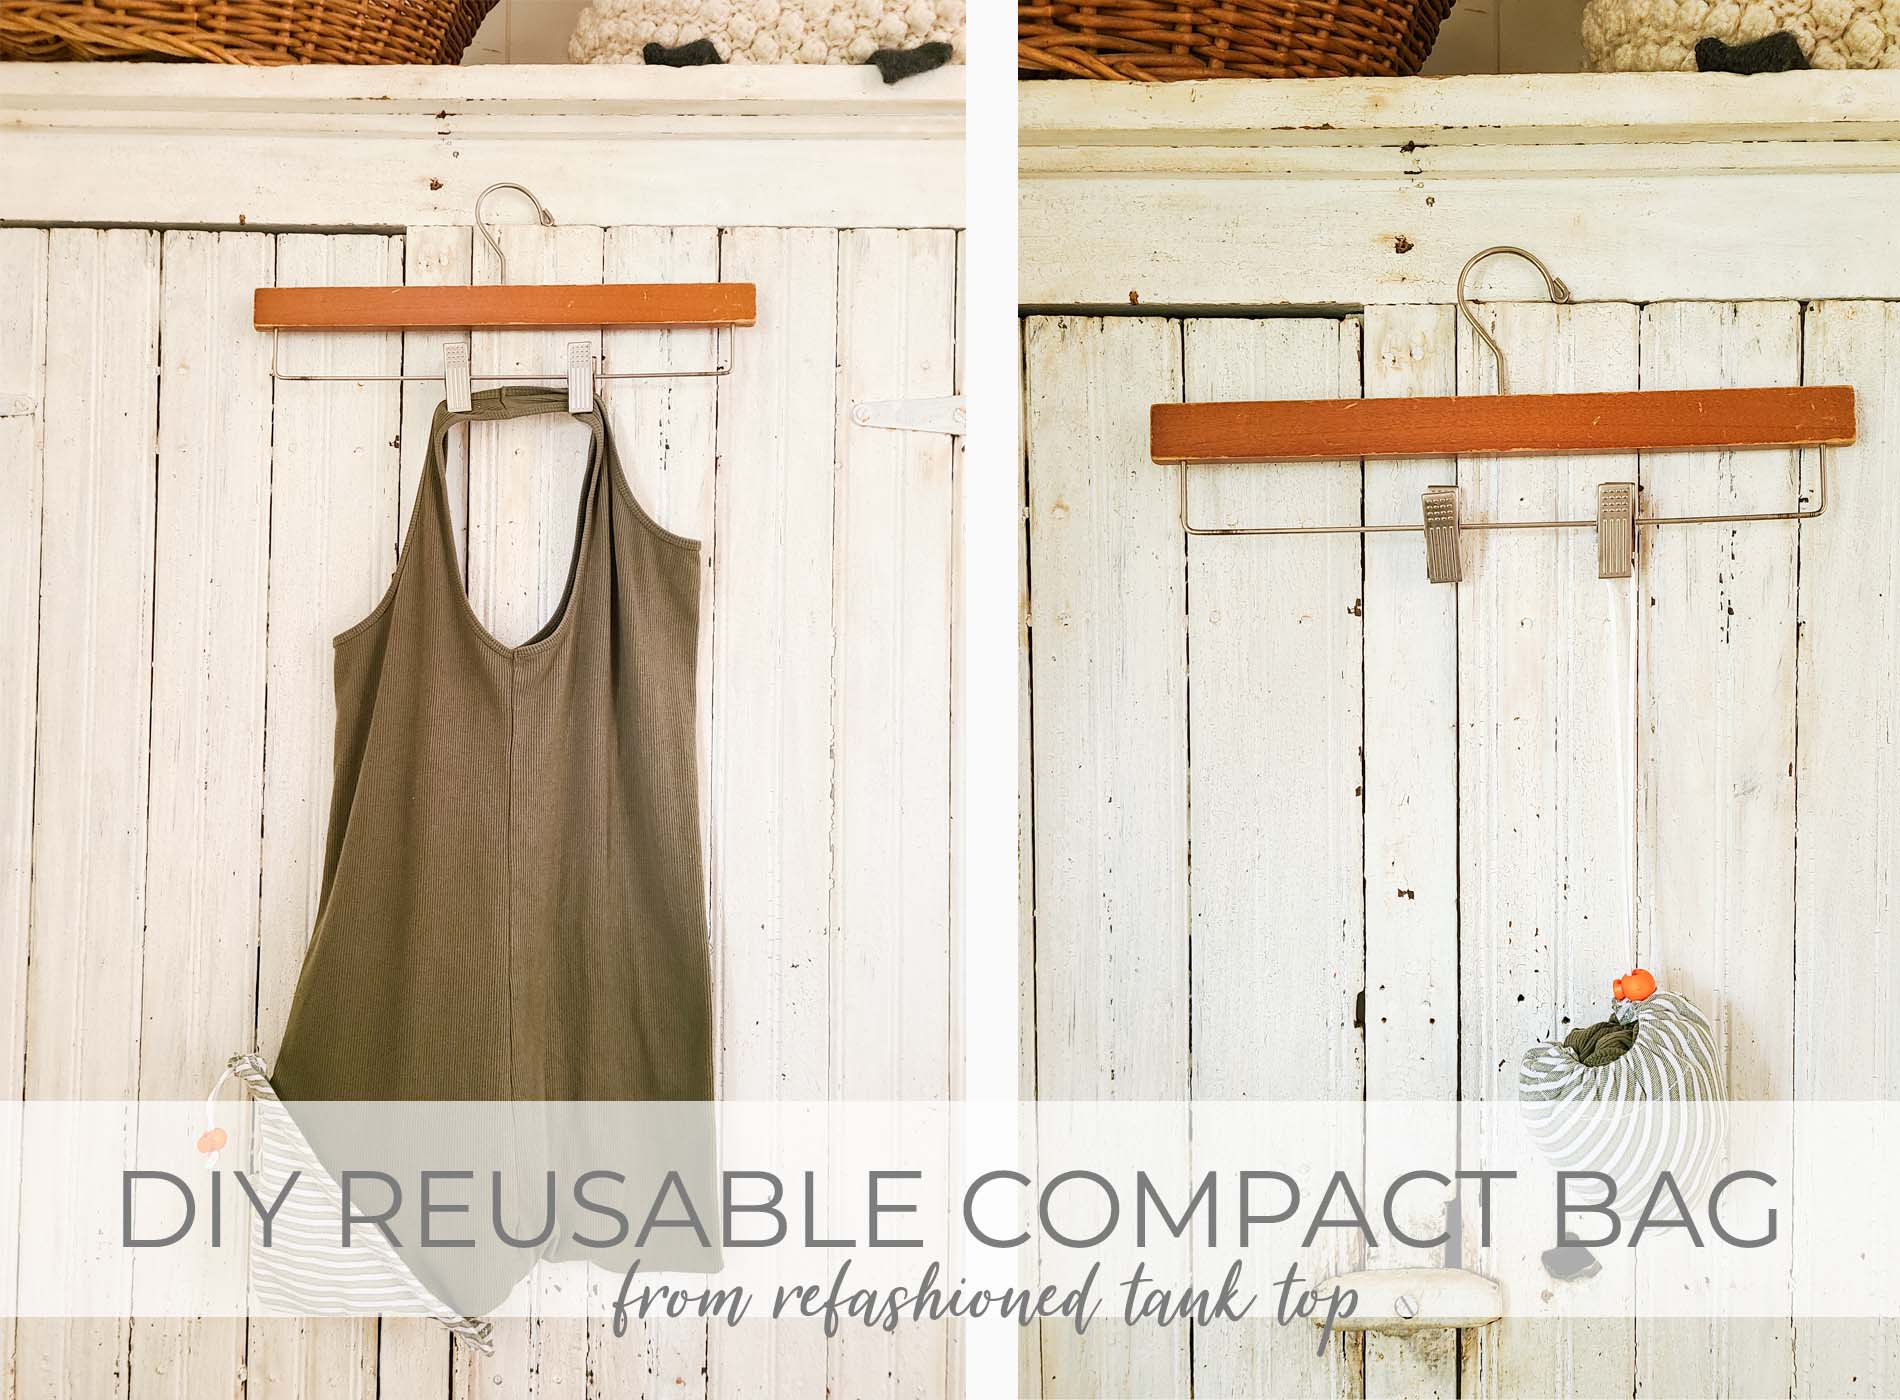 DIY Refashioned Reusable Compact Shopping Bag from Tank Top Tutorial by Larissa of Prodigal Pieces | prodigalpieces.com #prodigalpieces #sewing #refashion #handmade #shopping